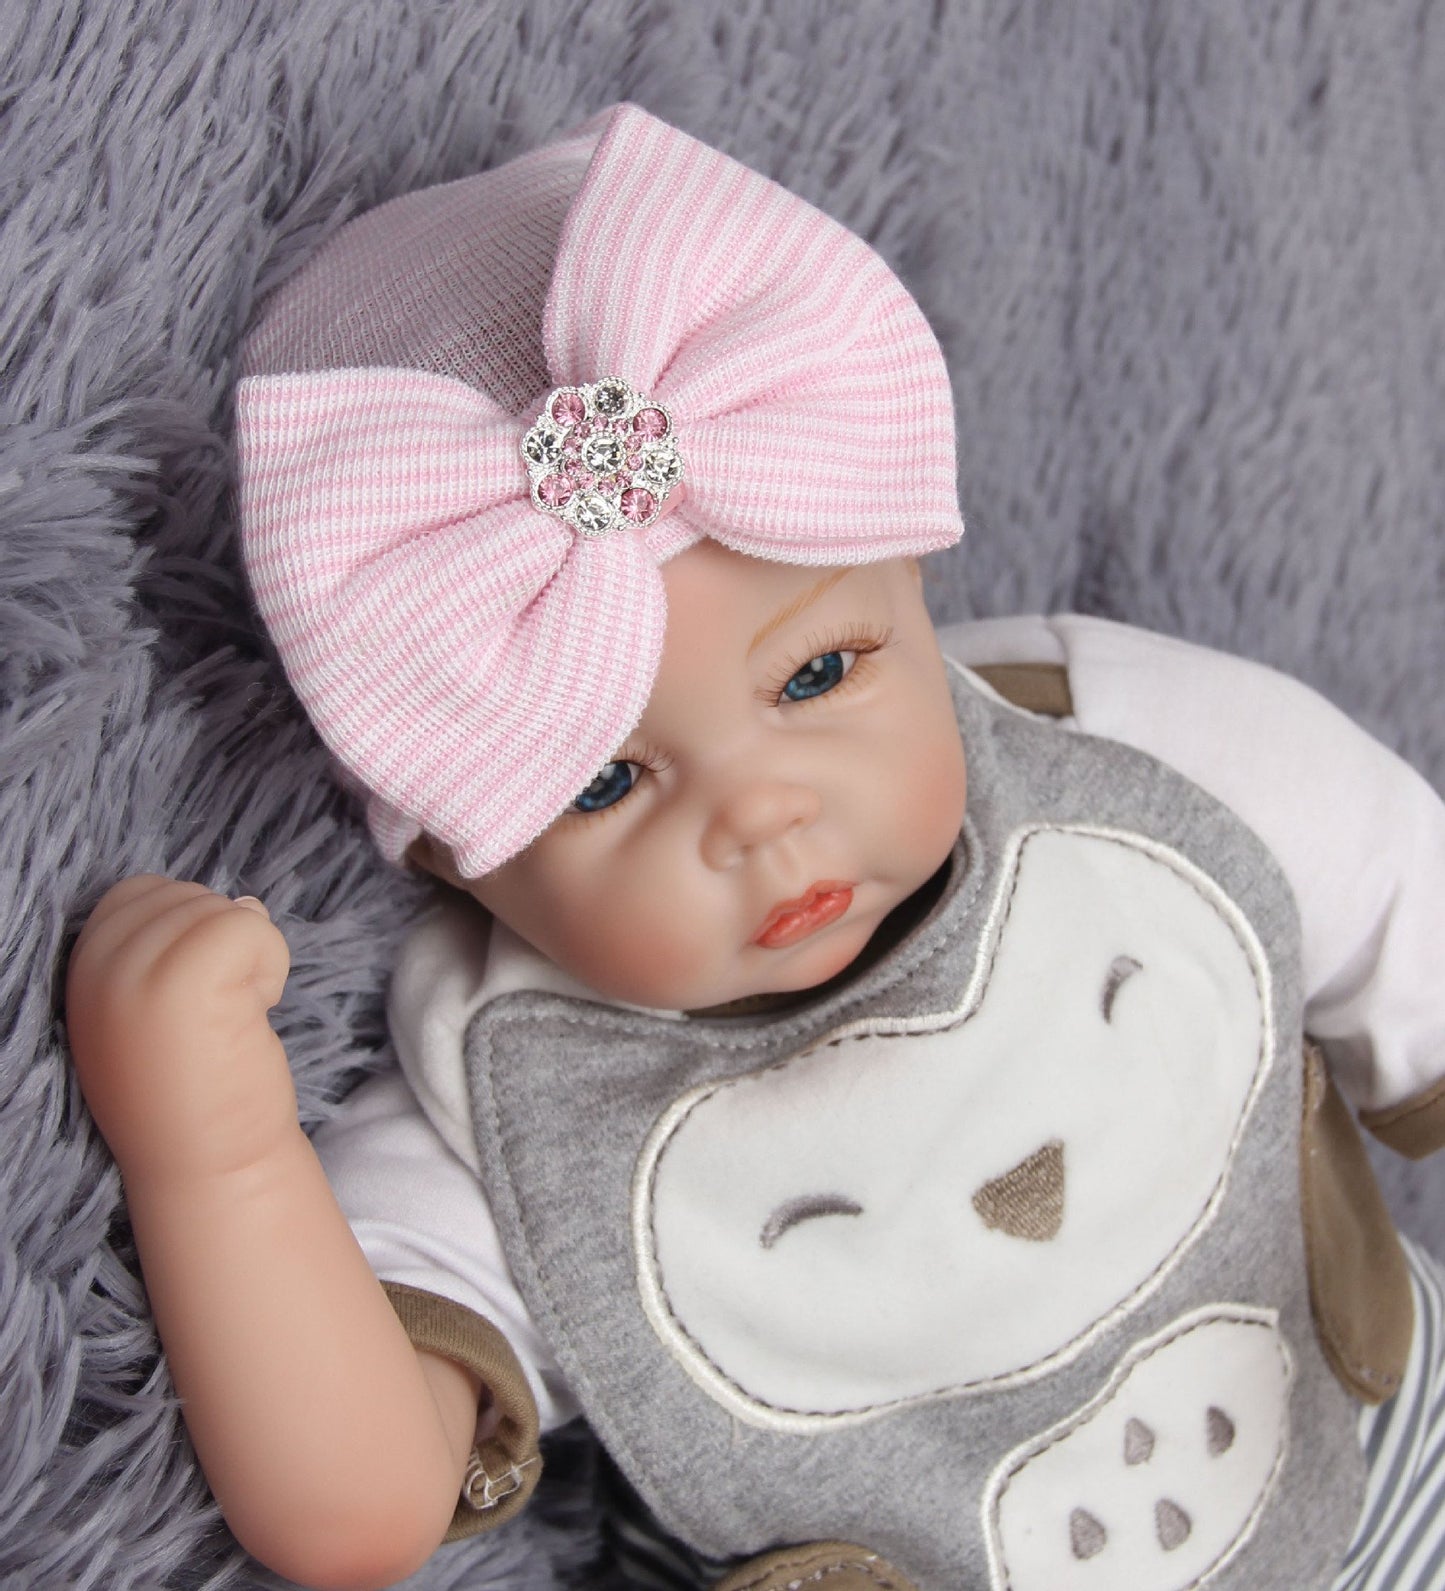 Cute Baby Knitted Hat with Butterfly Bow - Westfield Retailers